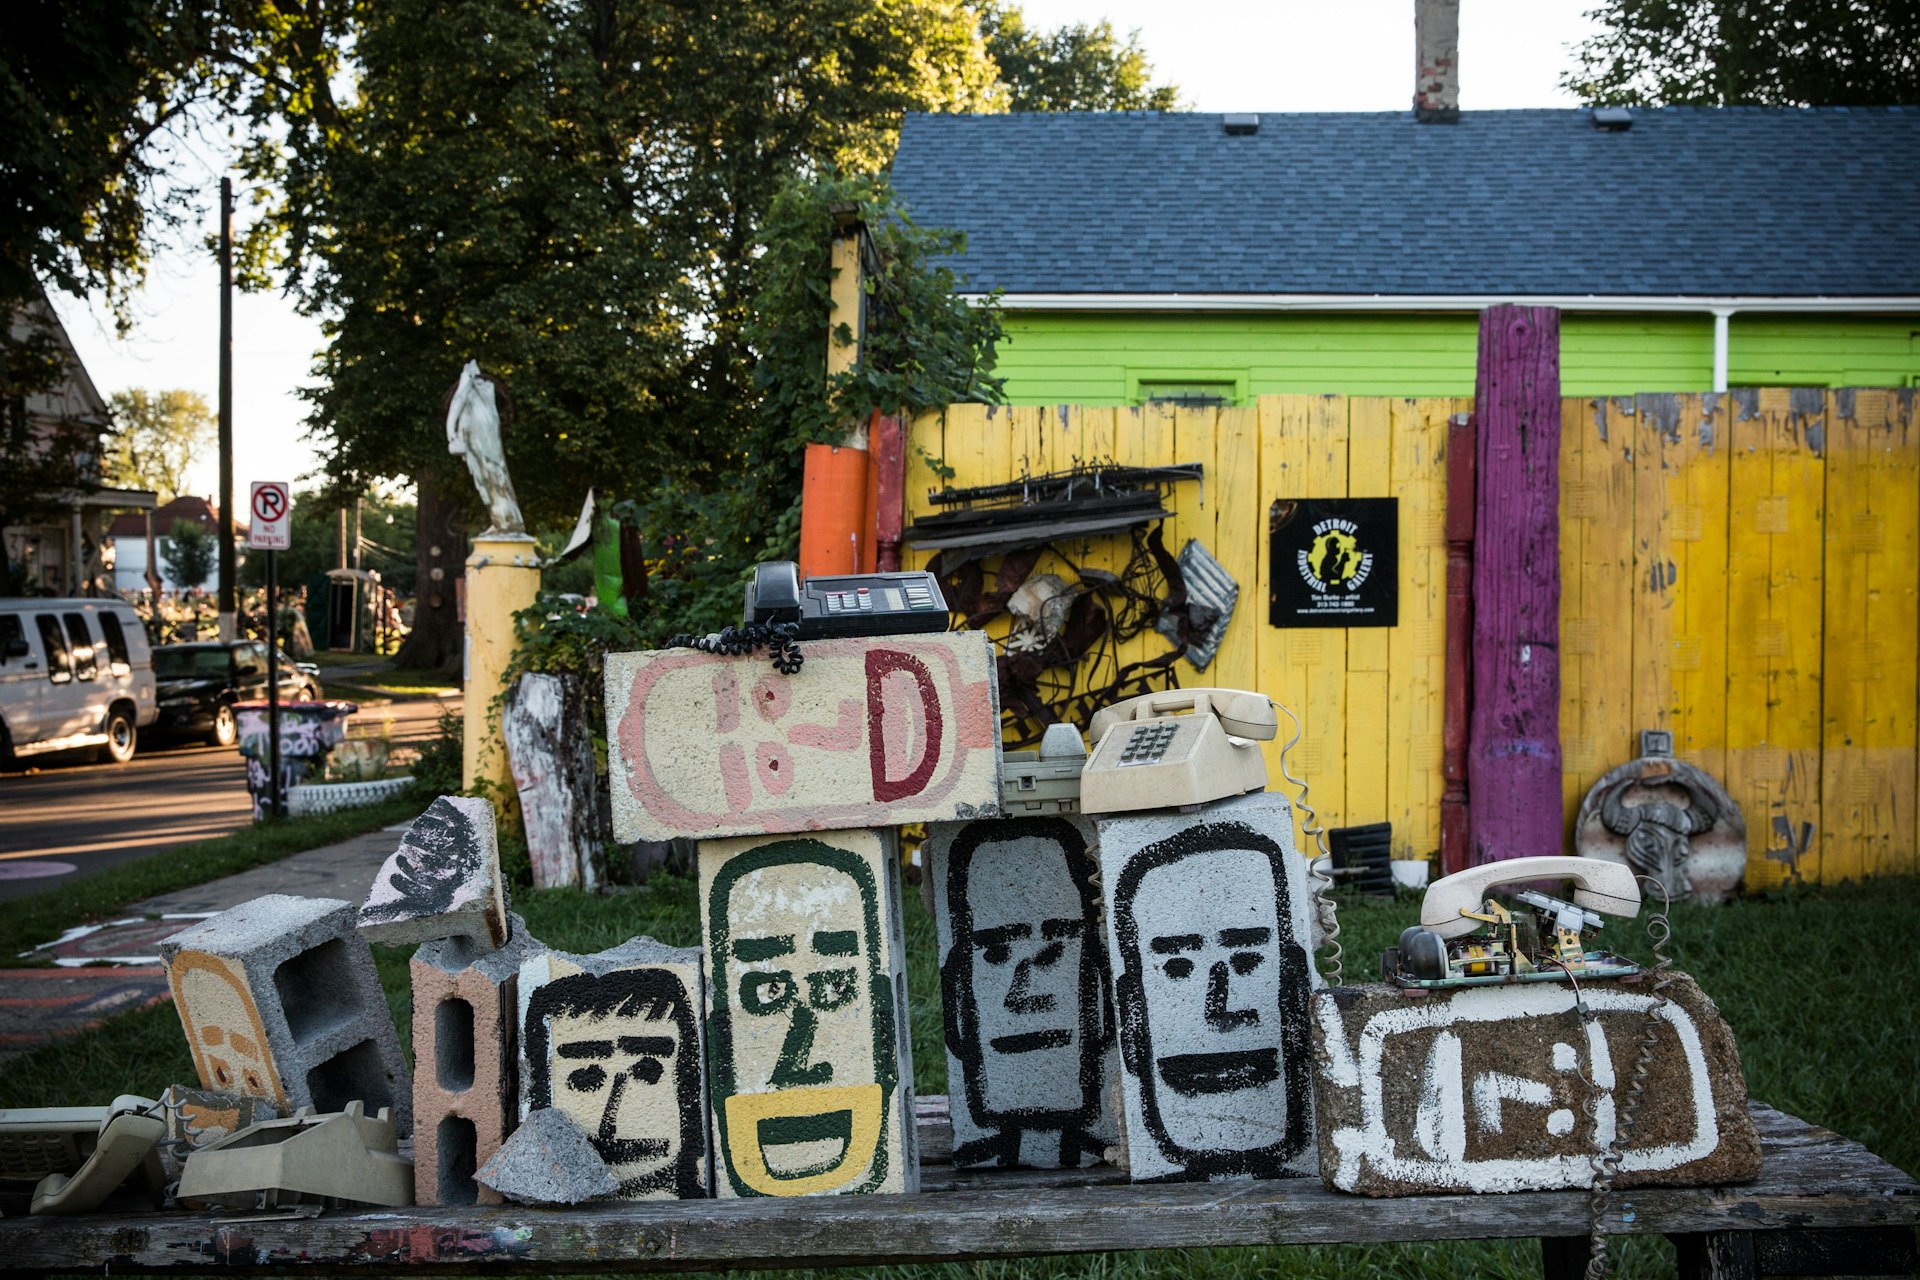 A sculpture created from recycled material sits amongst the "Heidelberg project," which is an "open air art environment" centered around one block in Detroit, Michigan.